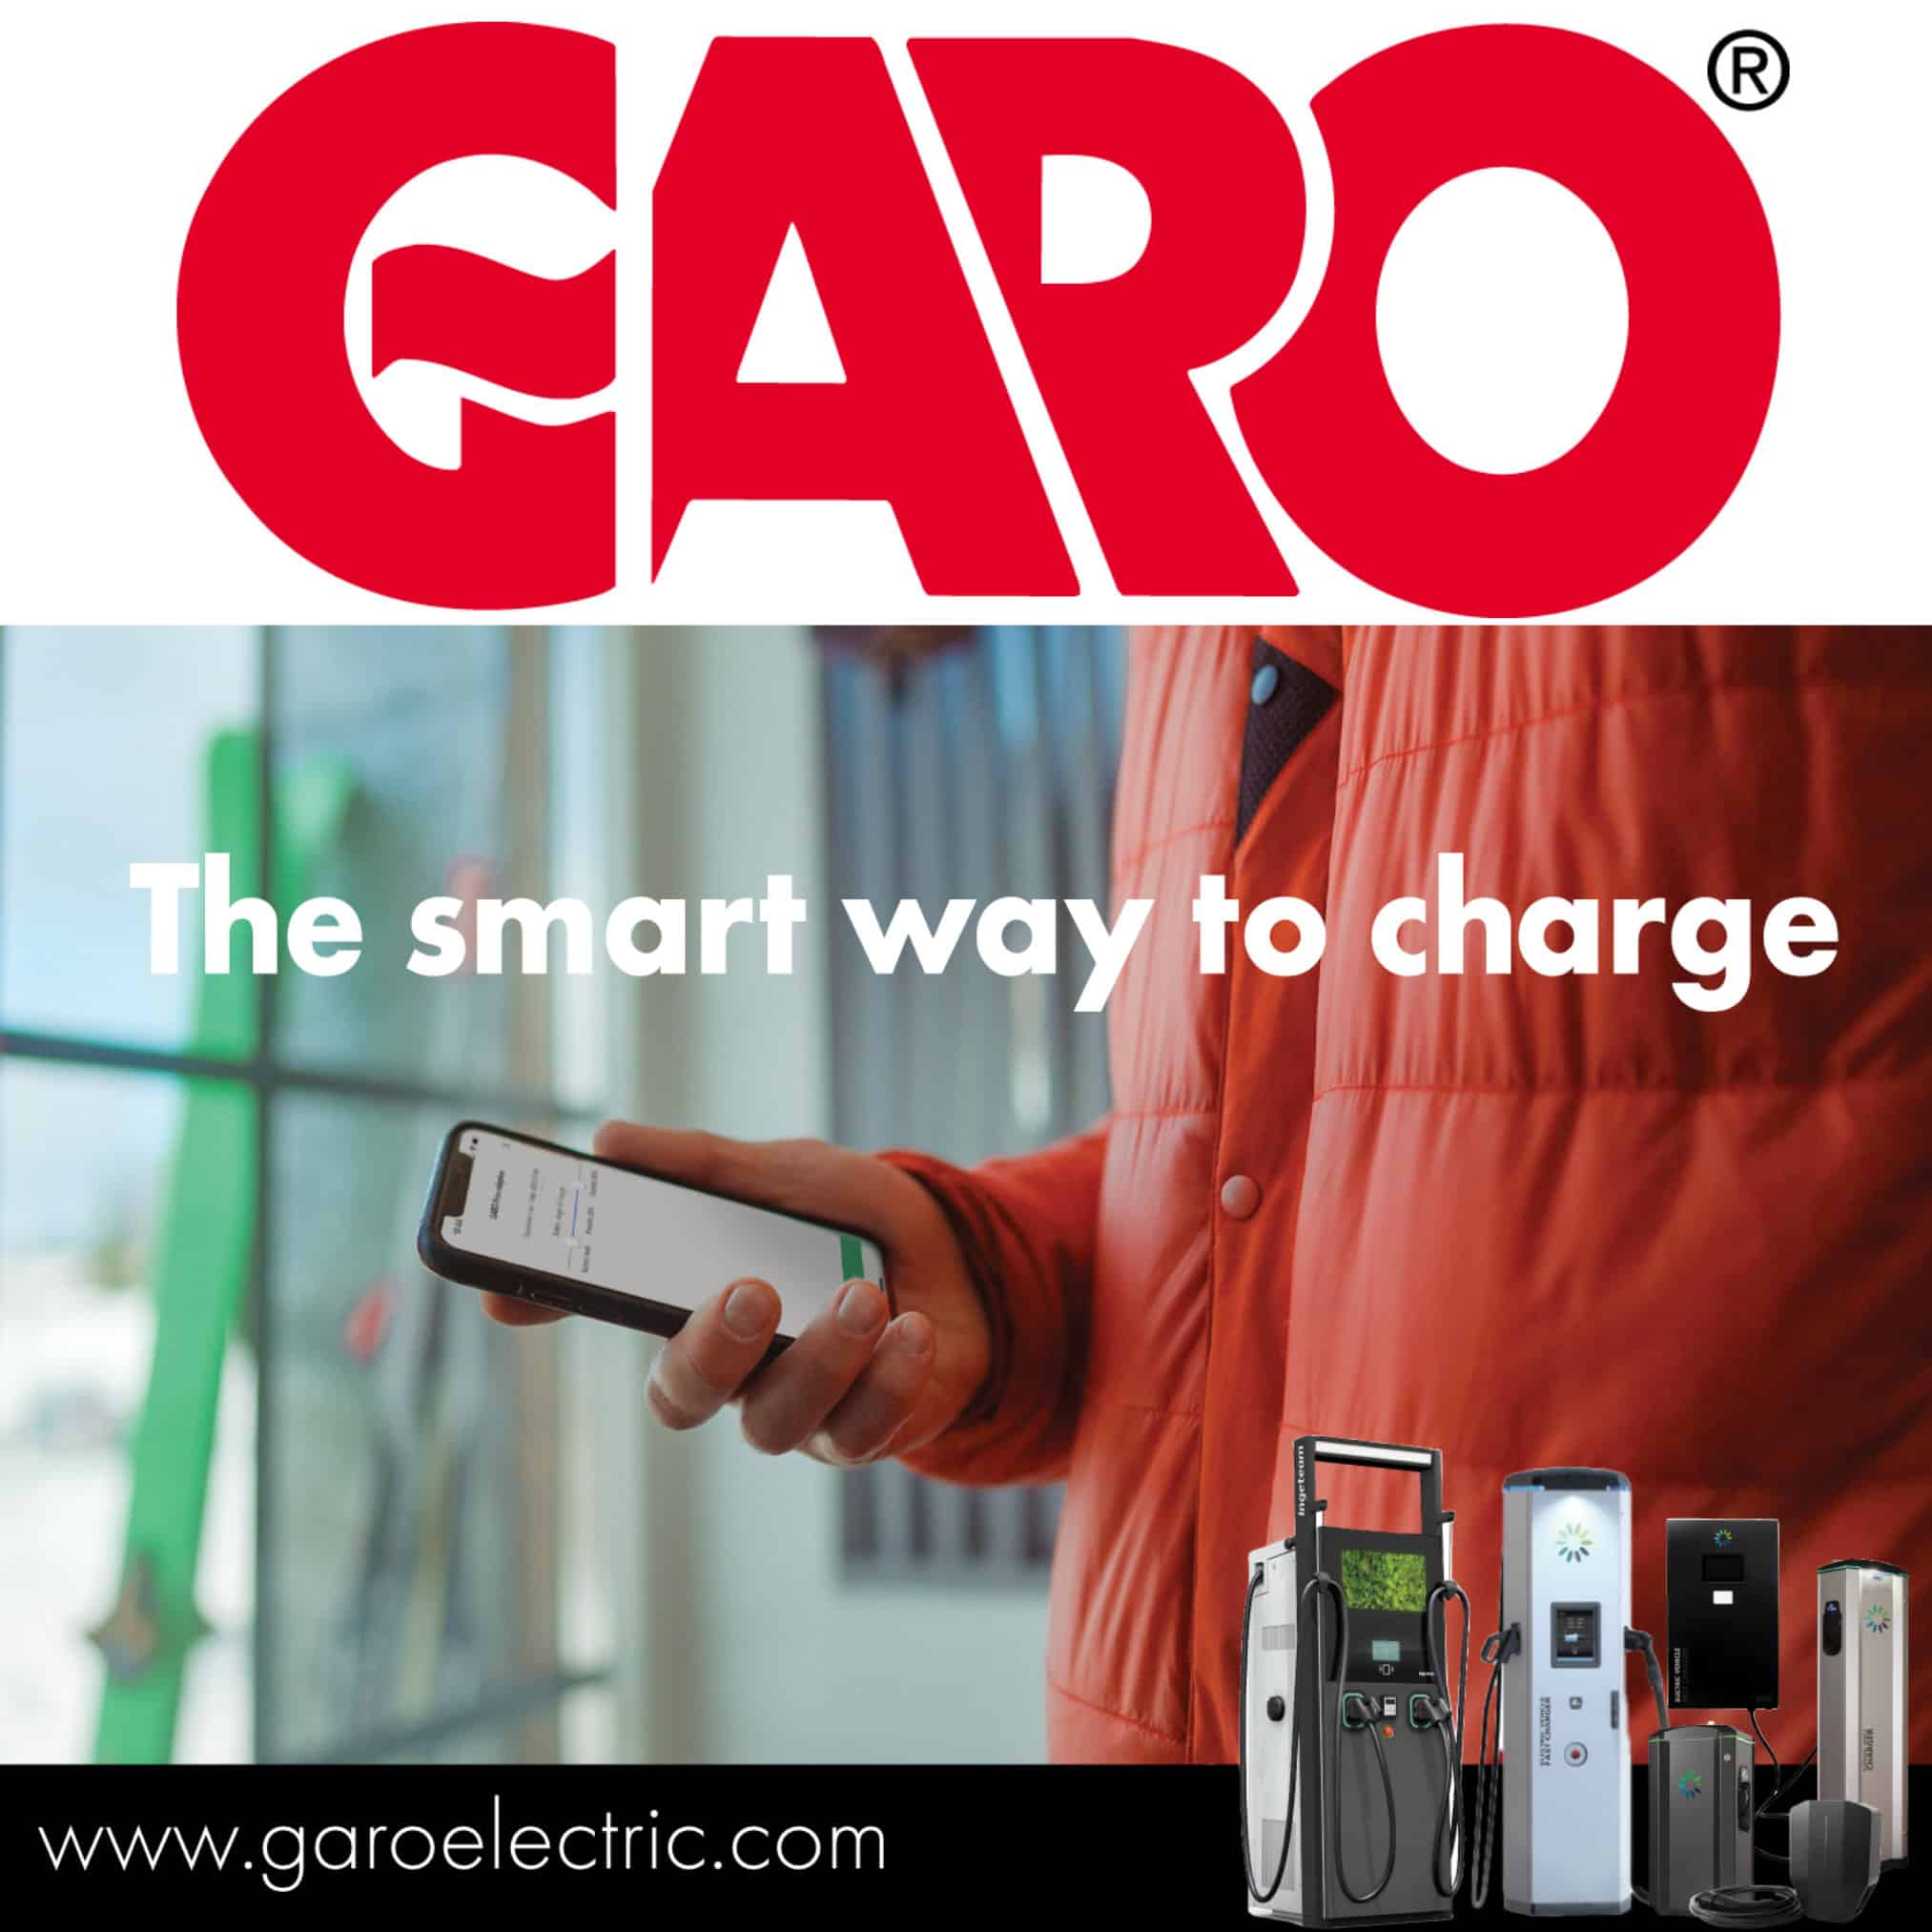 Garo available from UK EV Installers